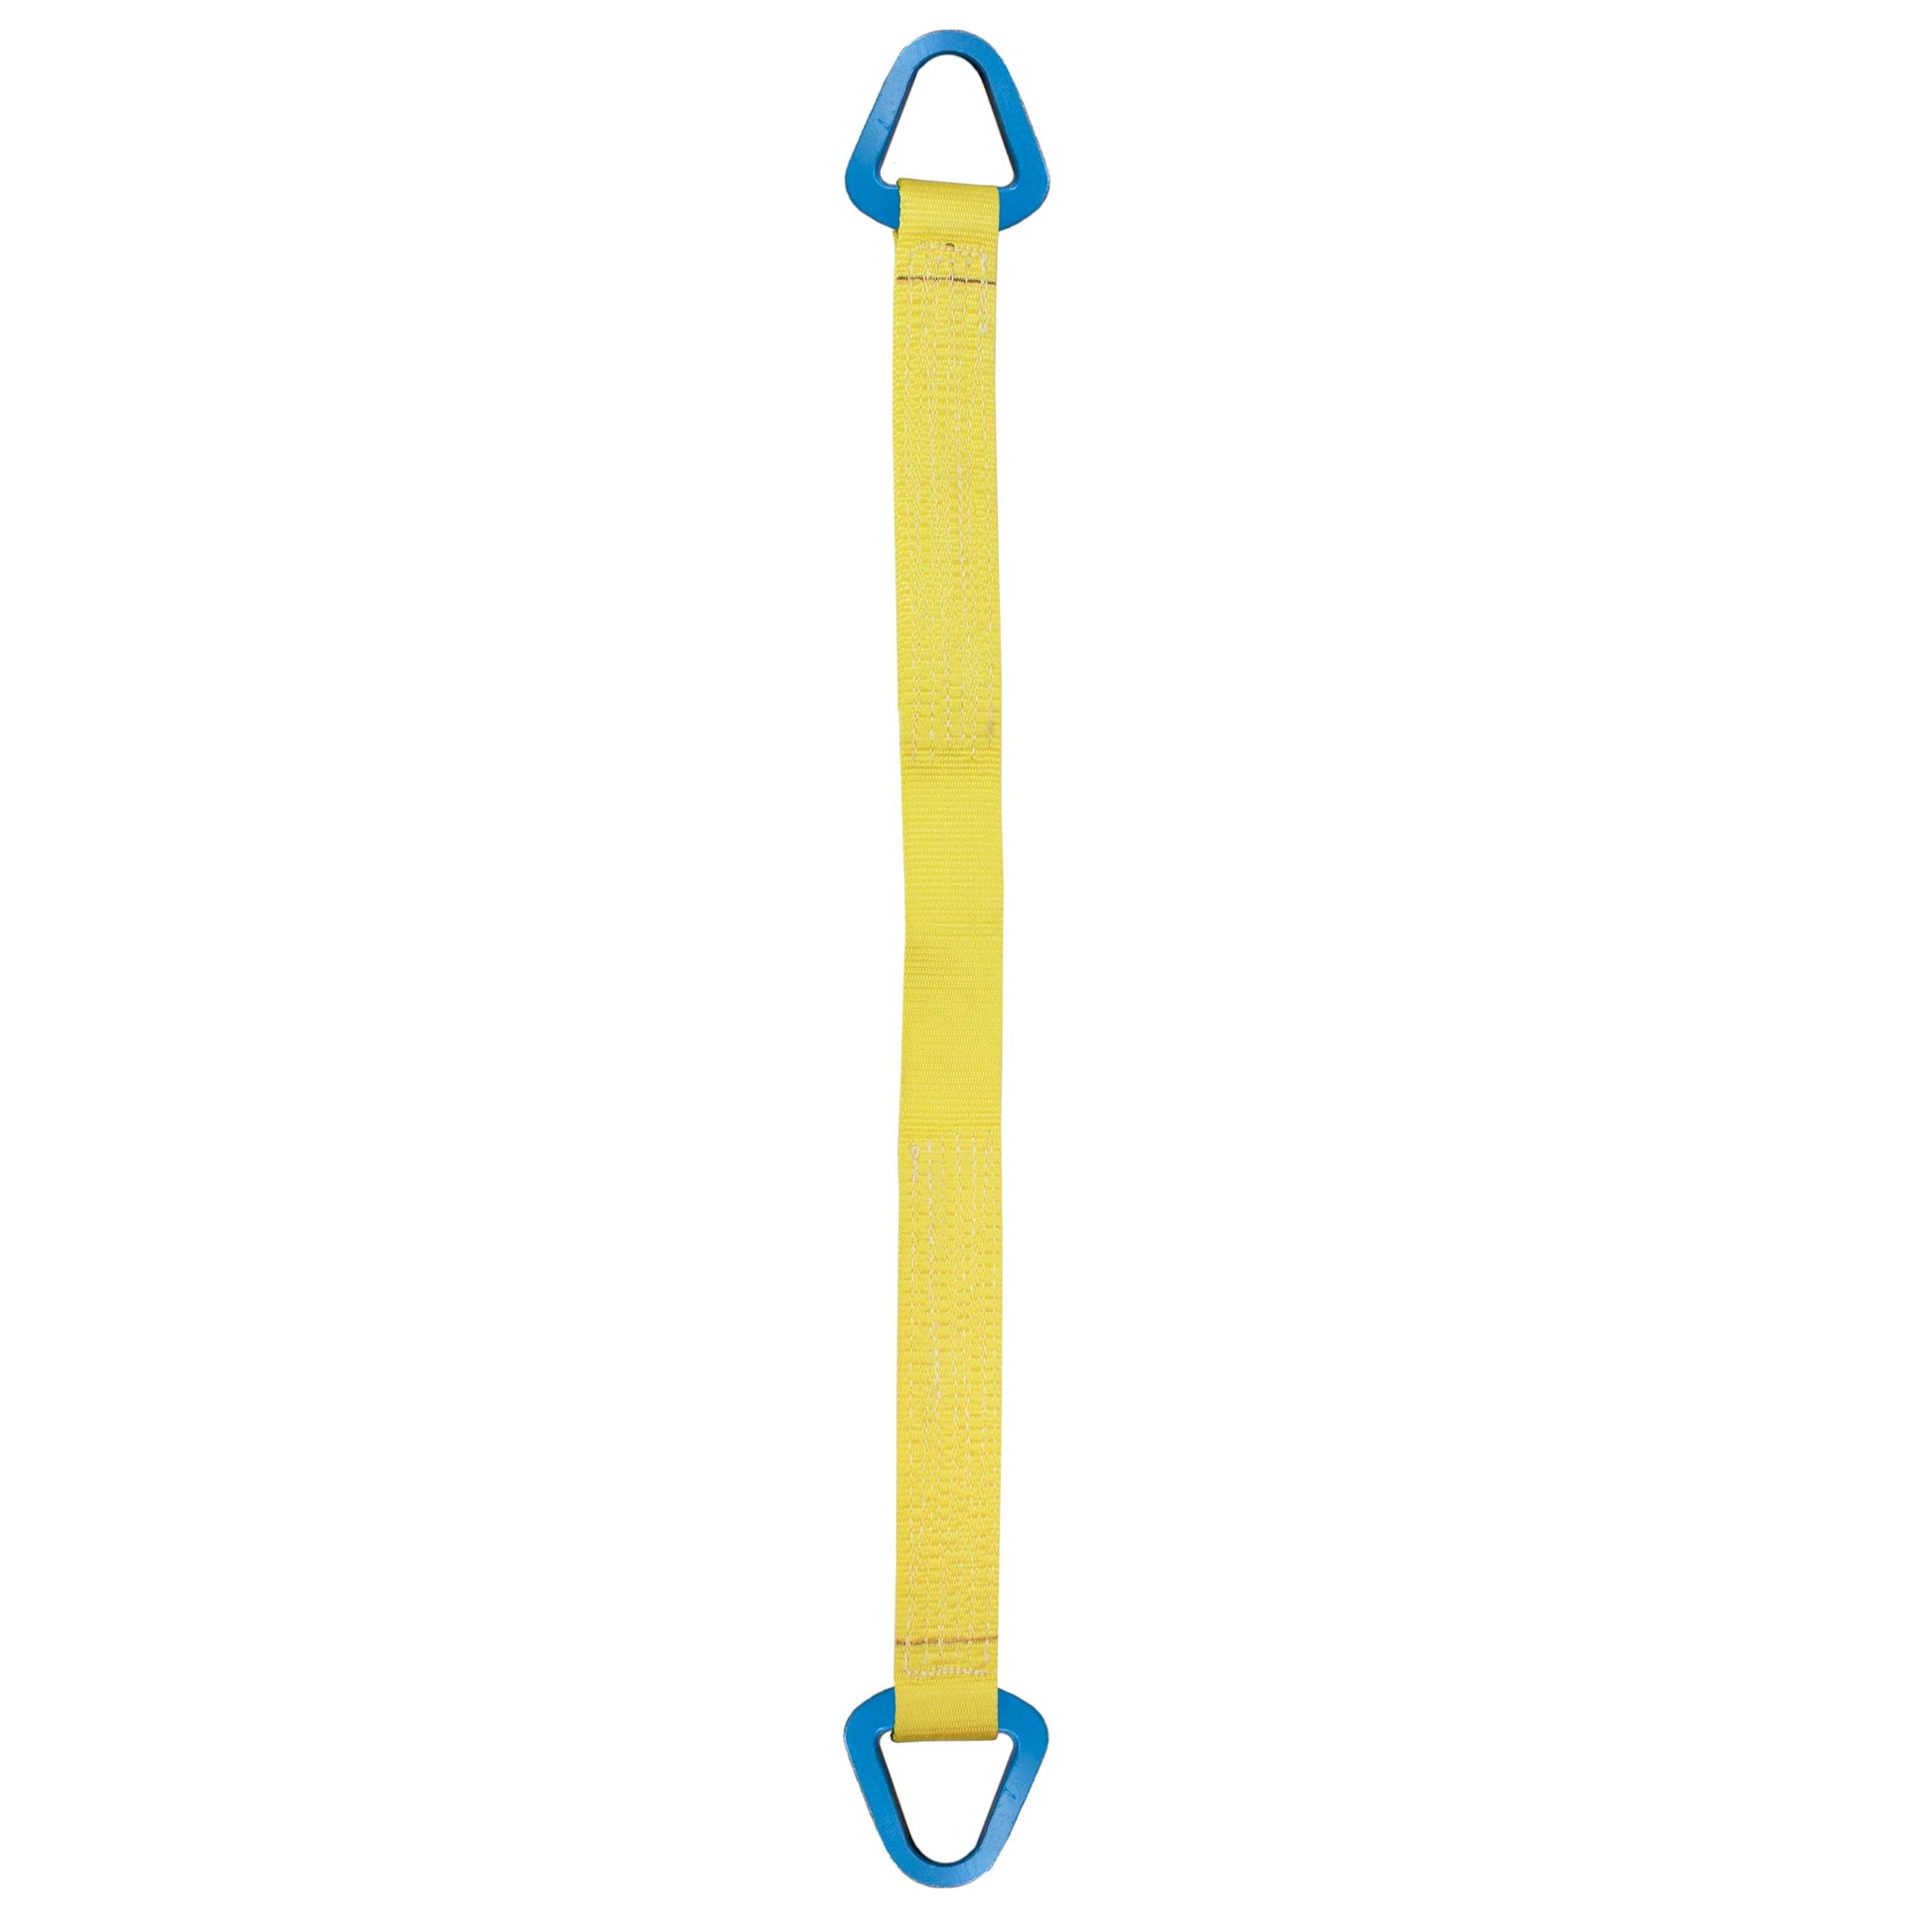 Nylon Lifting Sling Triangle 6 inch x 20 foot 1ply image 1 of 2